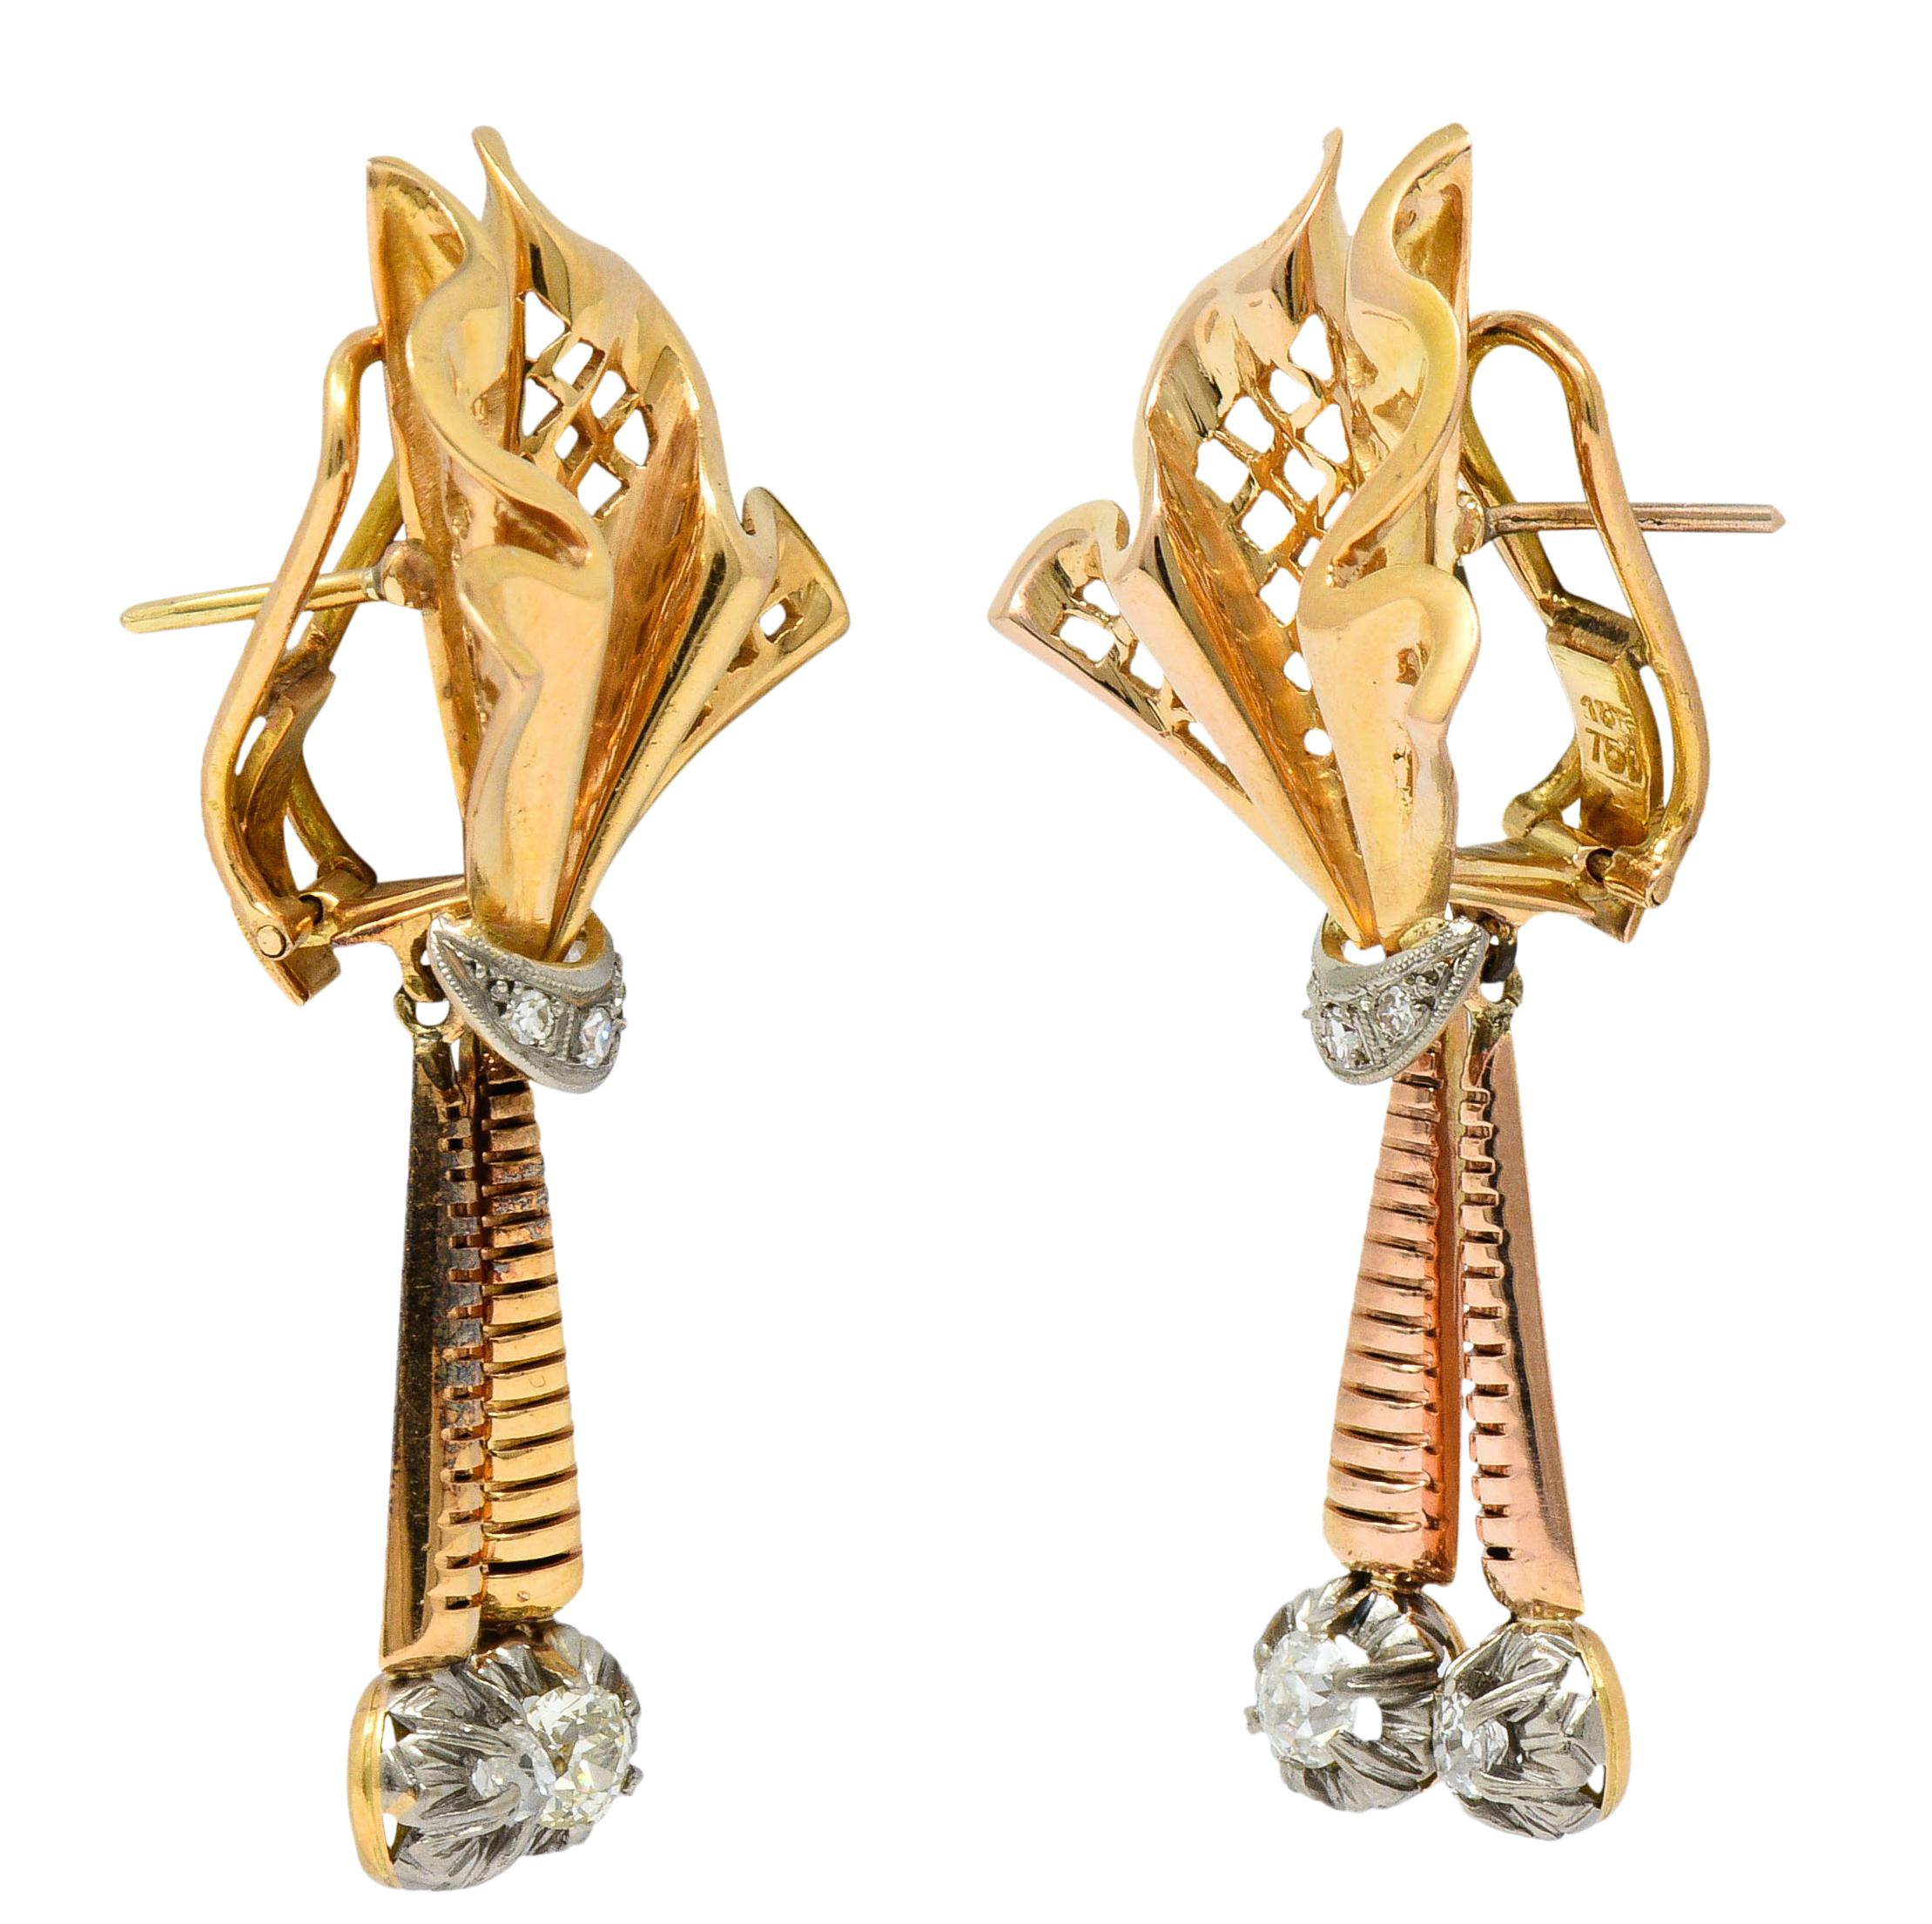 Drop earrings are designed as rouched ribbon surmounts with a pierced trellis motif; yellow gold

Suspending two articulated and deeply ridged rose gold bars

With white gold areas accented by old mine and single cut diamonds

Weighing in total